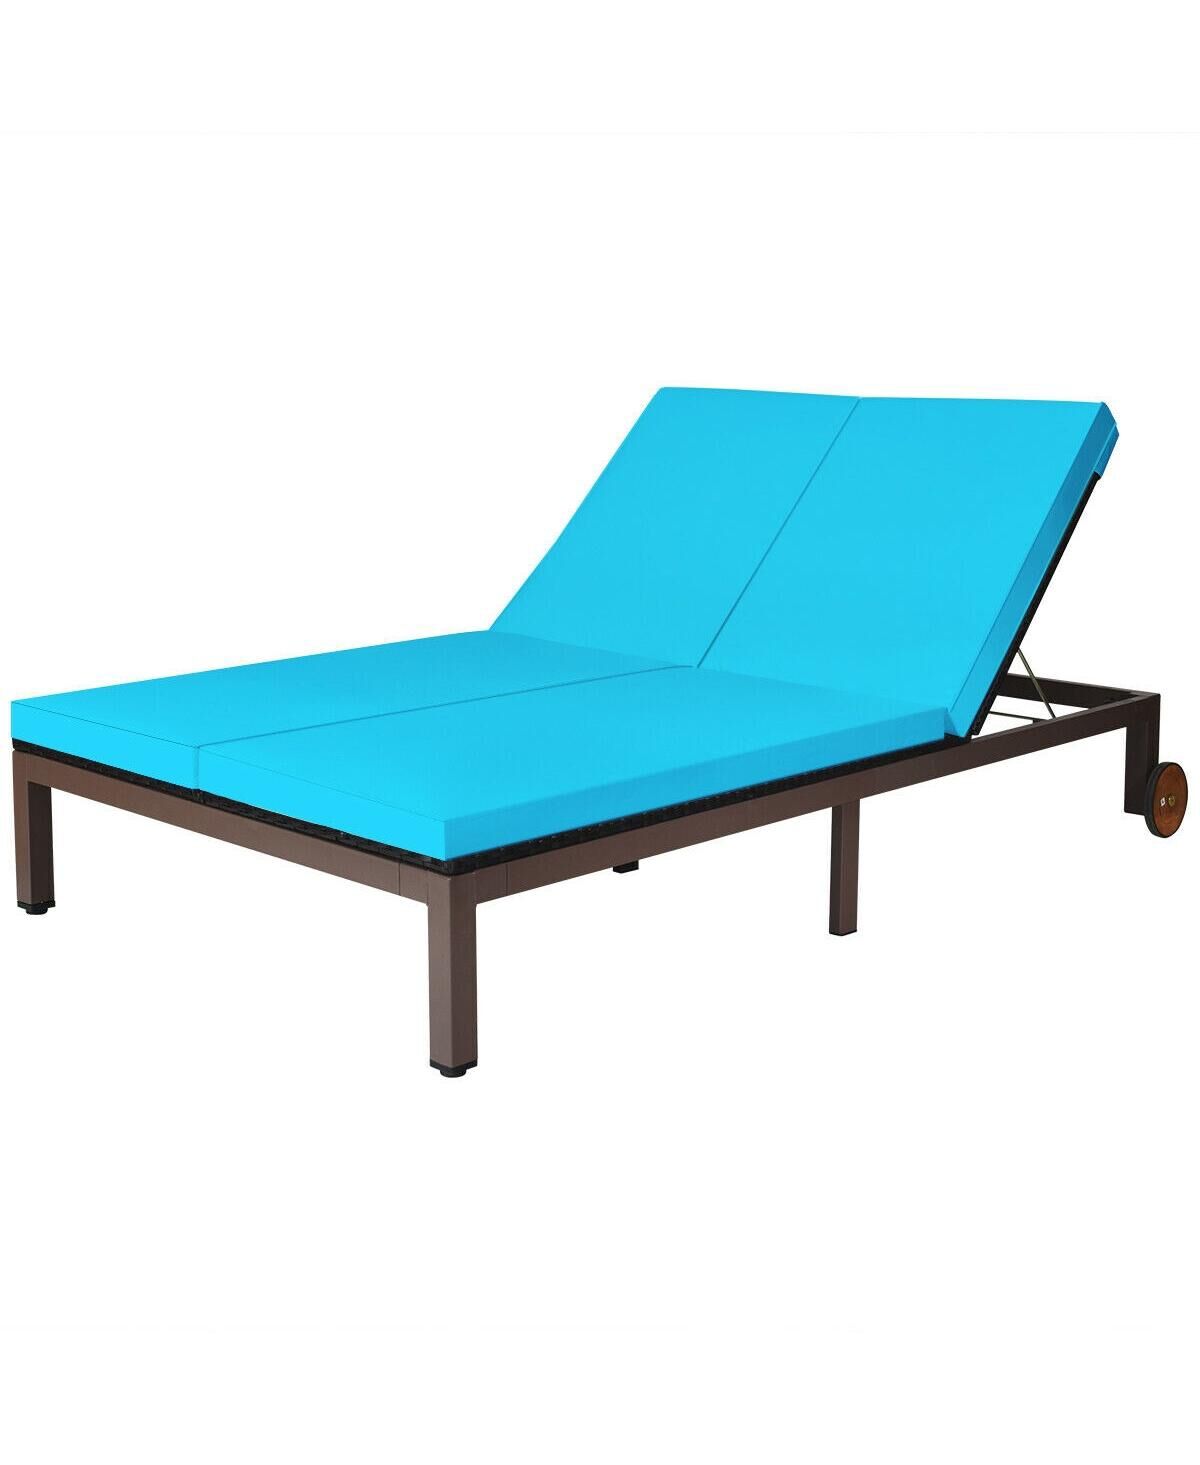 Slickblue 2-Person Patio Rattan Lounge Chair with Adjustable Backrest - Turquoise